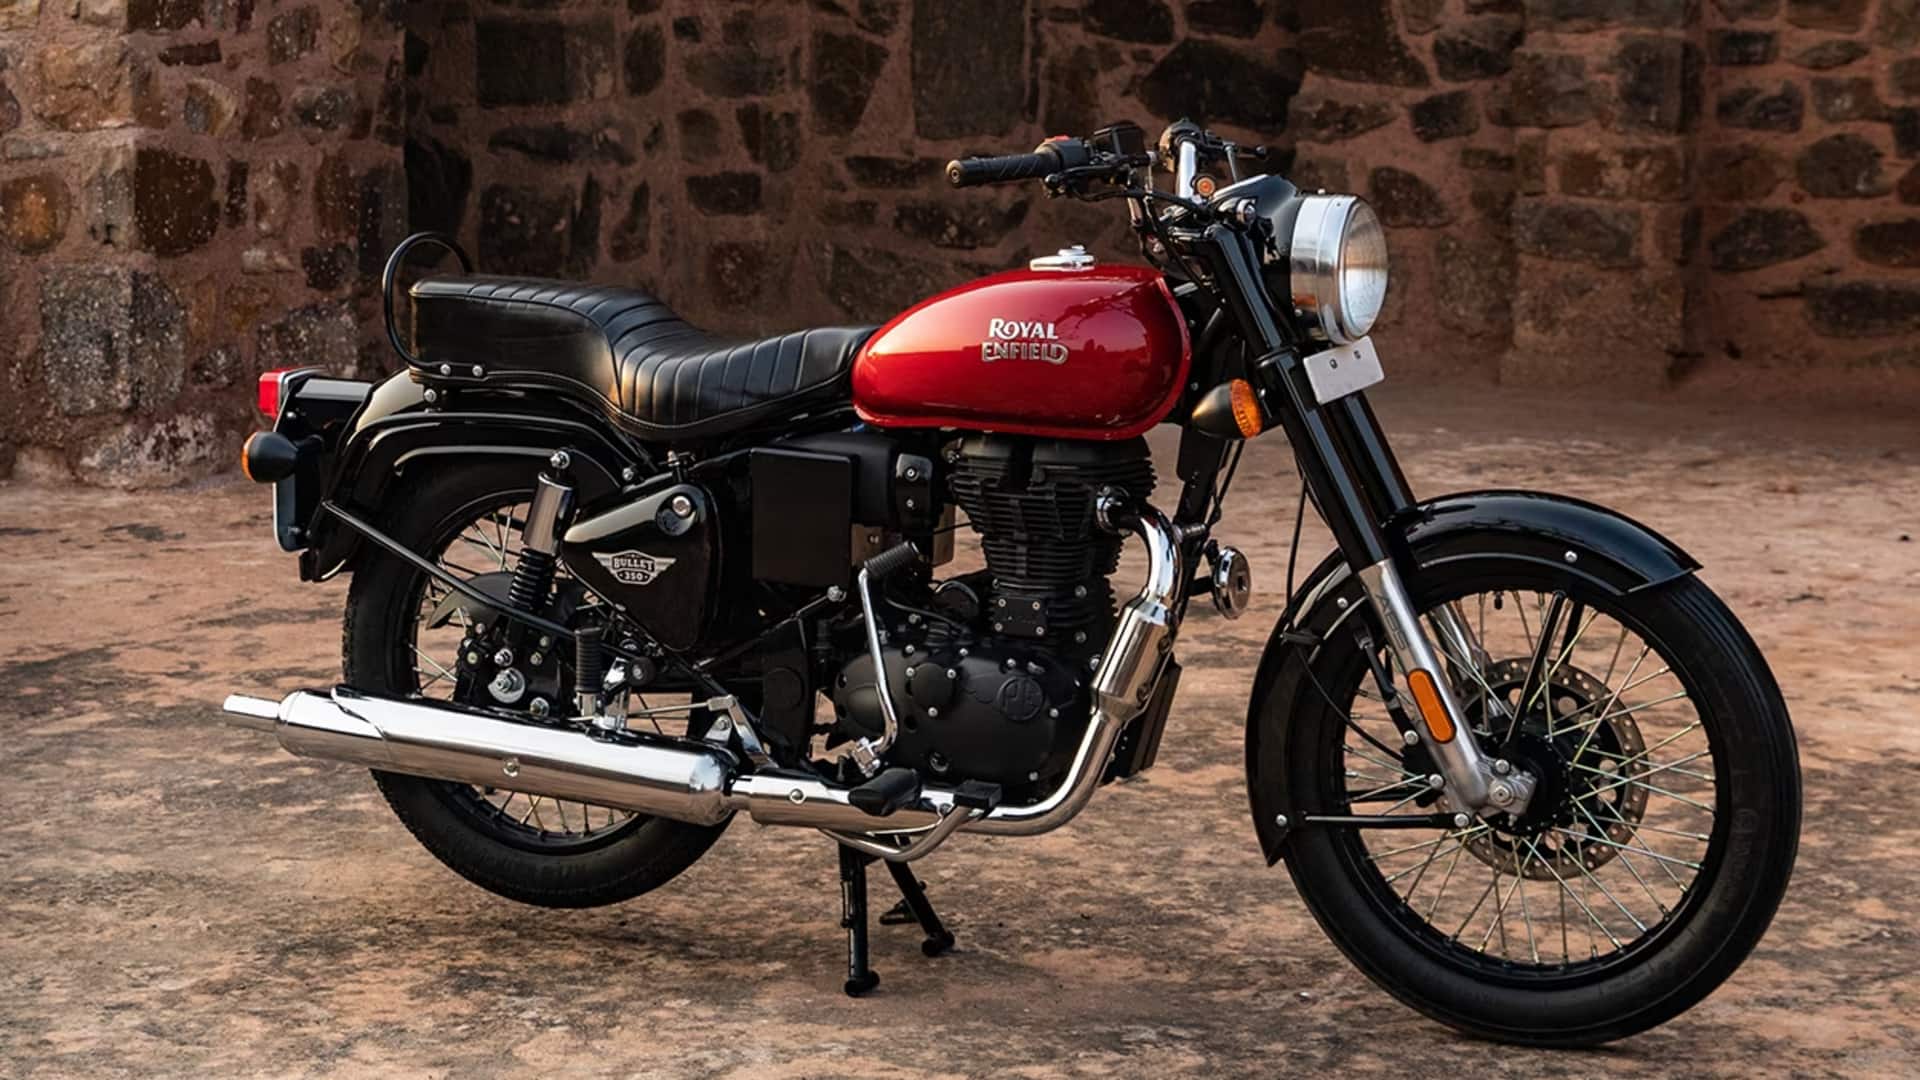 Upcoming Royal Enfield Bullet 350 to receive a massive overhaul